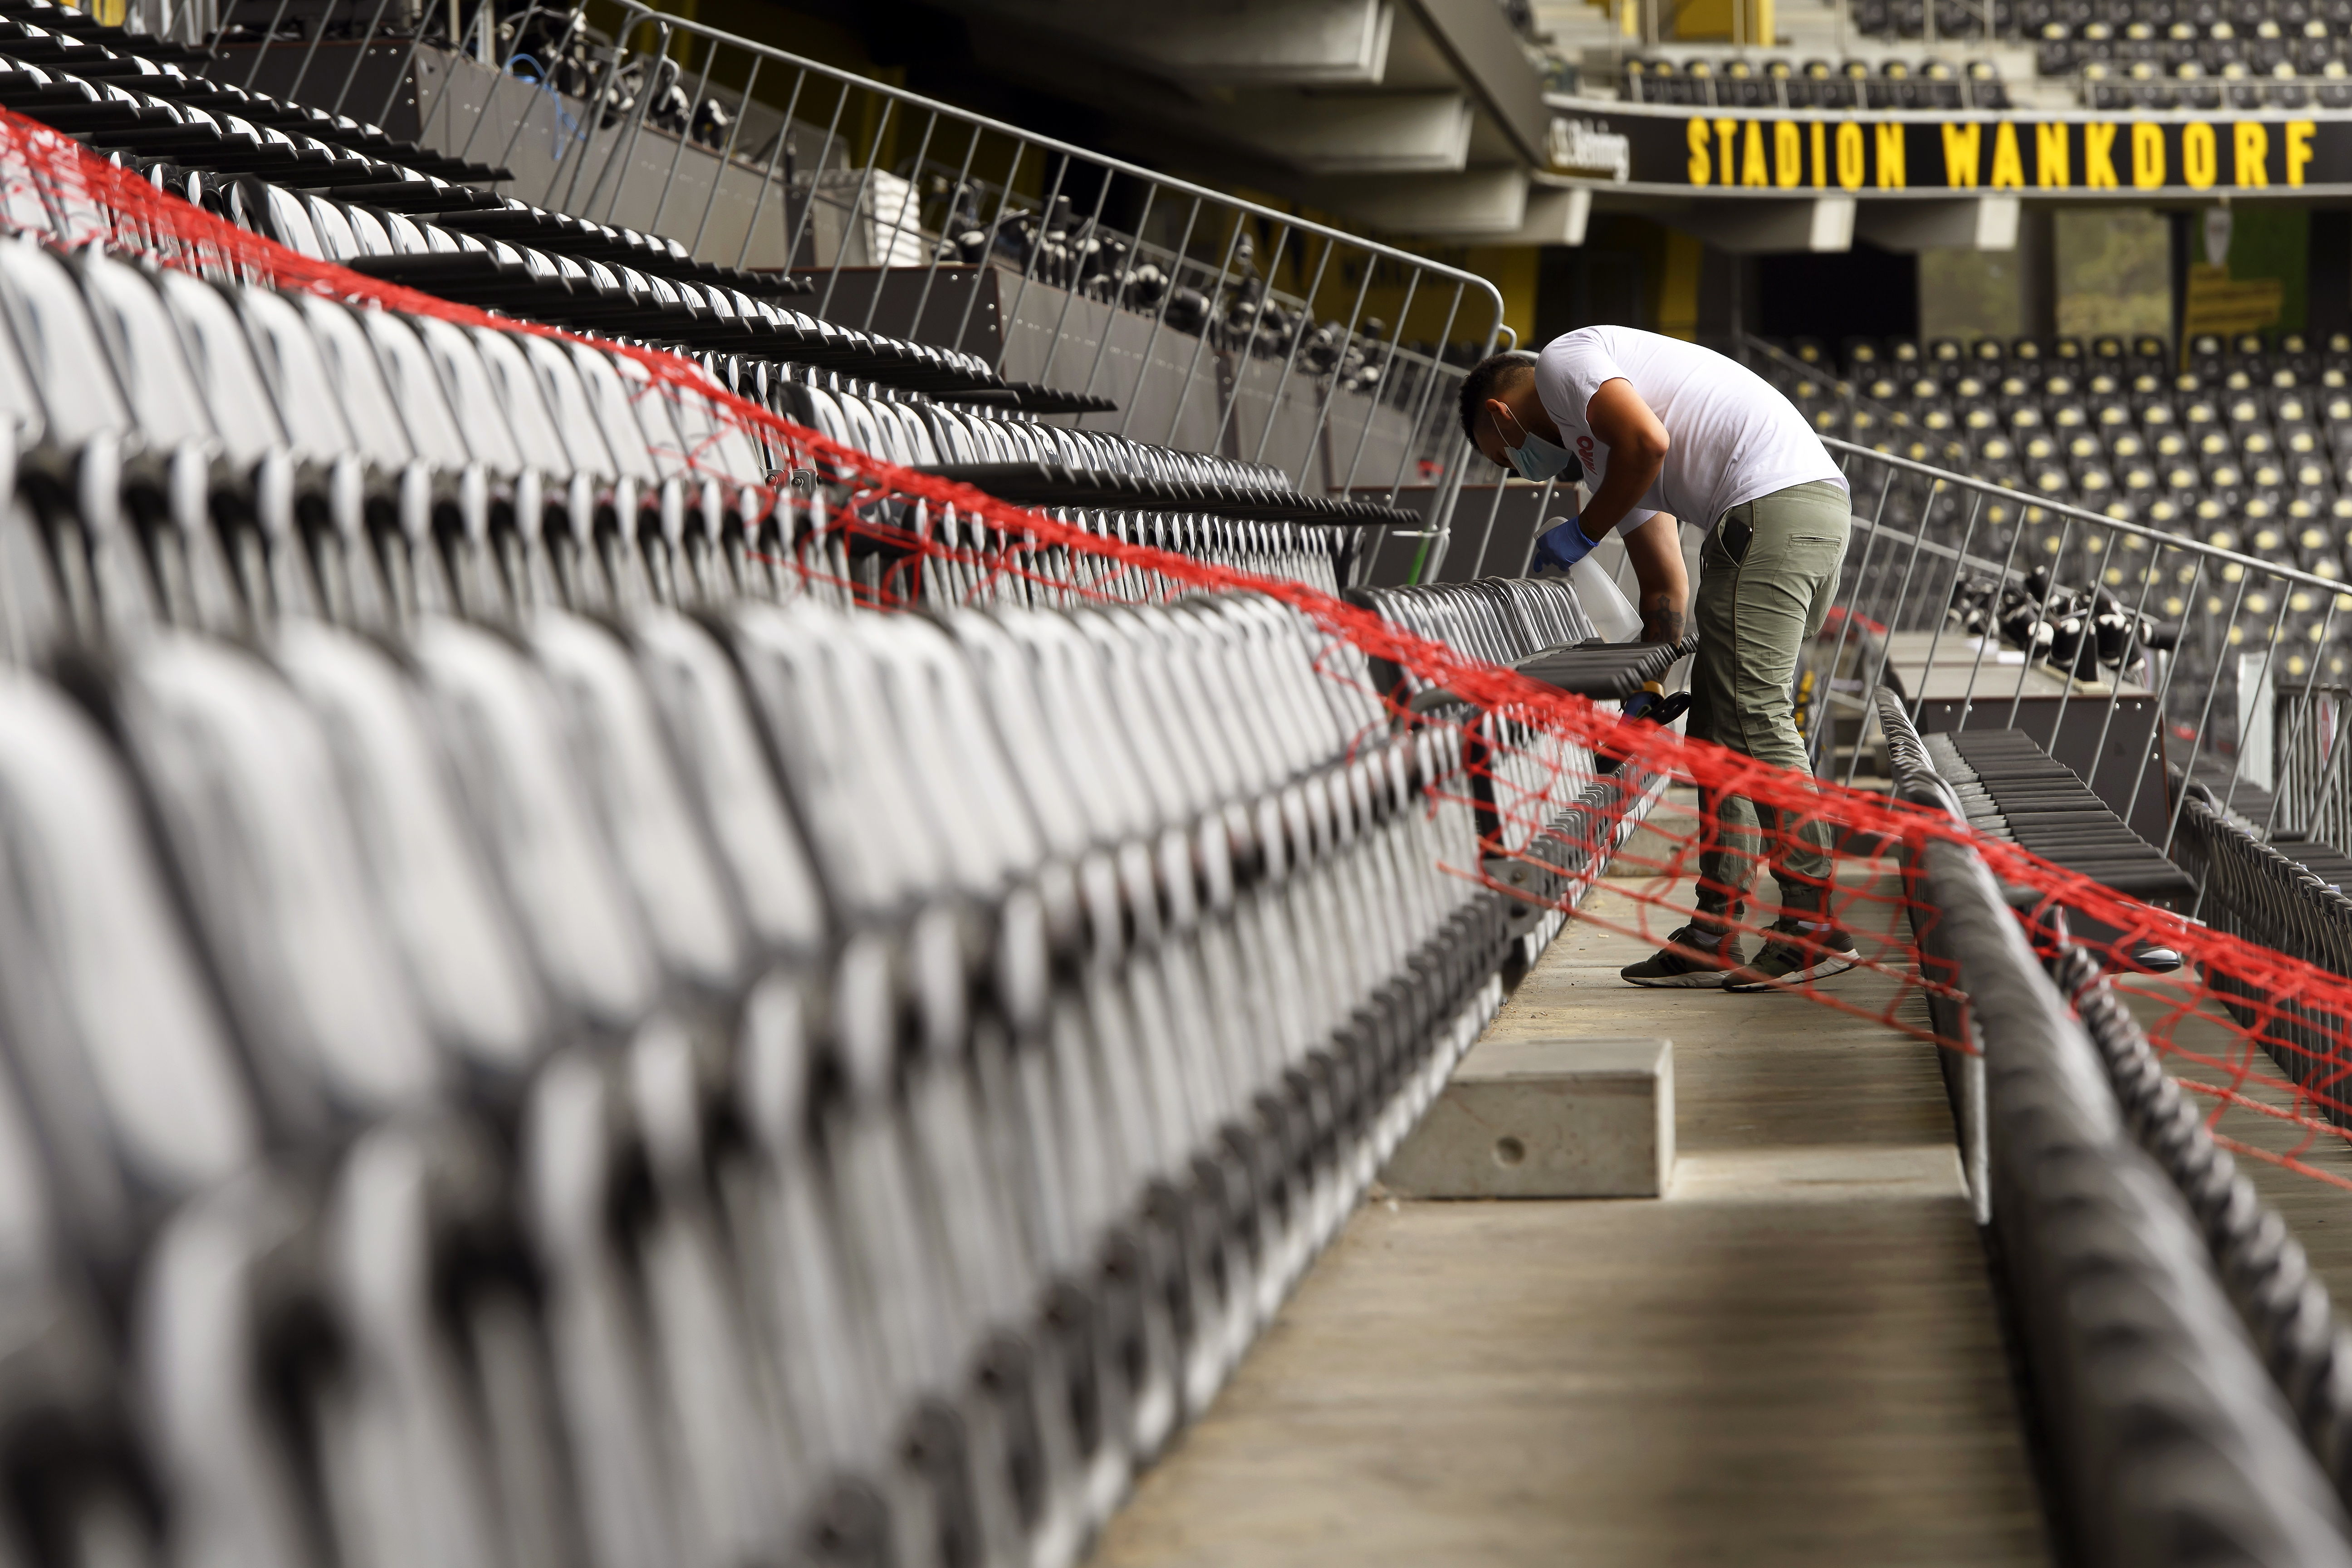 Bern (Switzerland), 25/08/2020.- A volunteer disinfects spectator seats during a training session of BSC Young Boys at Wankdorf stadium in Bern, Switzerland, 25 August 2020. BSC Young Boys will face KI Klaksvik in their UEFA Champions League second qualifying round soccer match on 26 August 2020. (Liga de Campeones, Suiza) EFE/EPA/ANTHONY ANEX